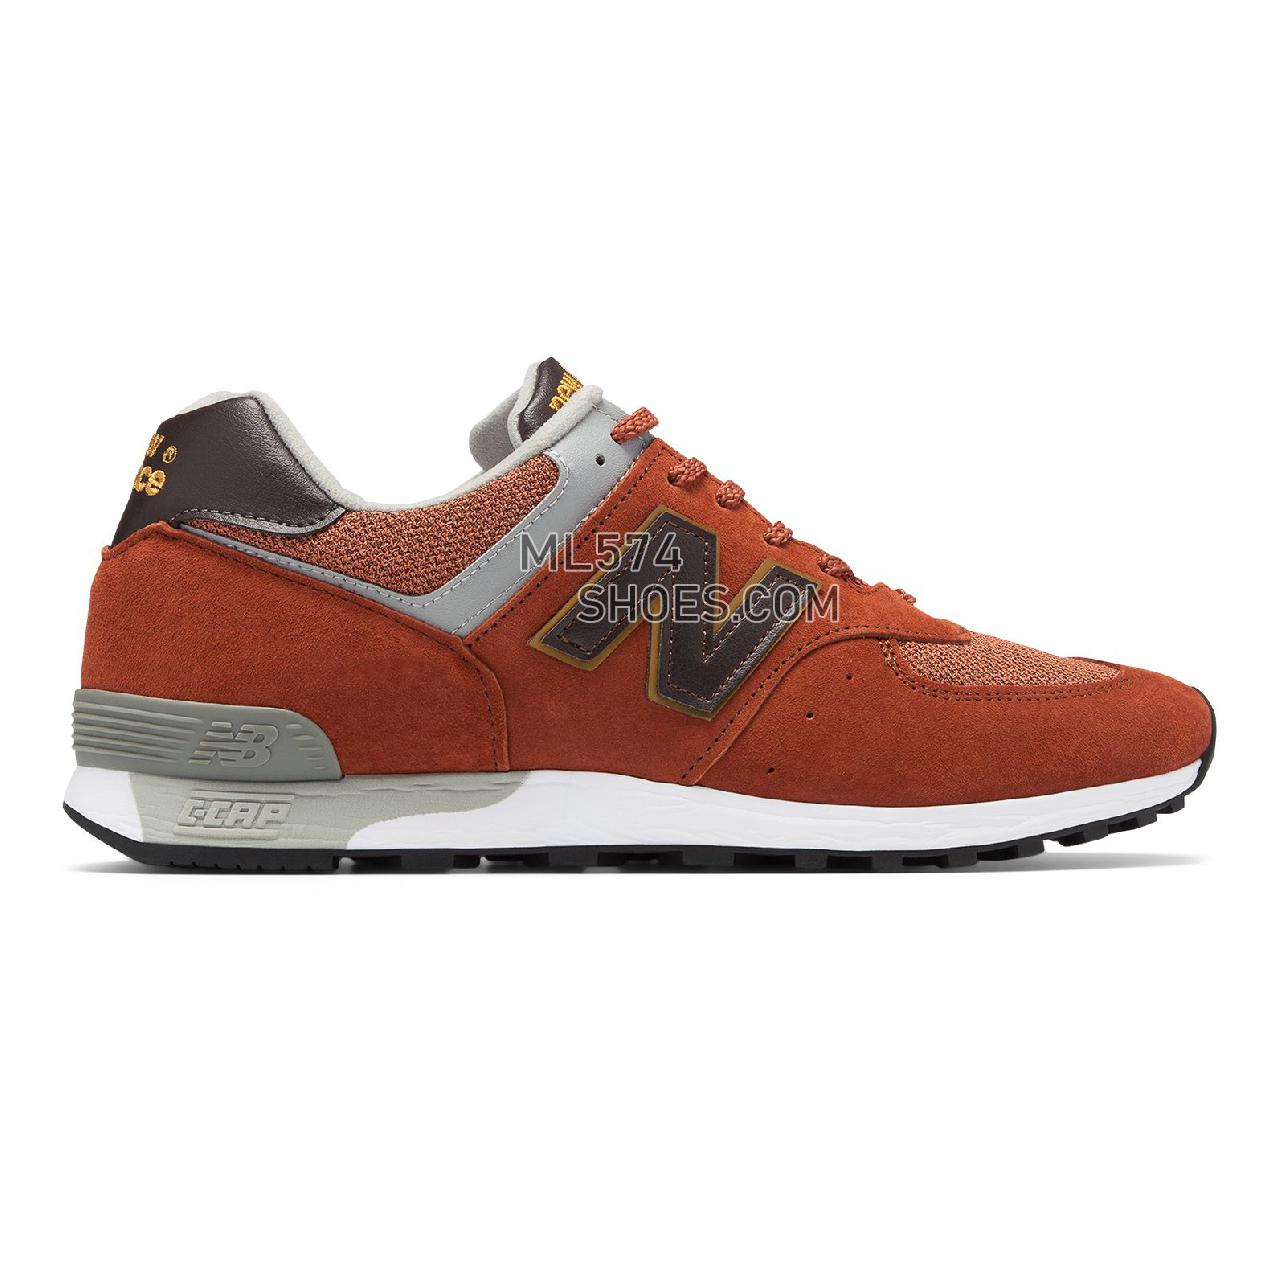 New Balance 576 Made in UK - Women's 576 - Classic Brick with Grey - W576BOS